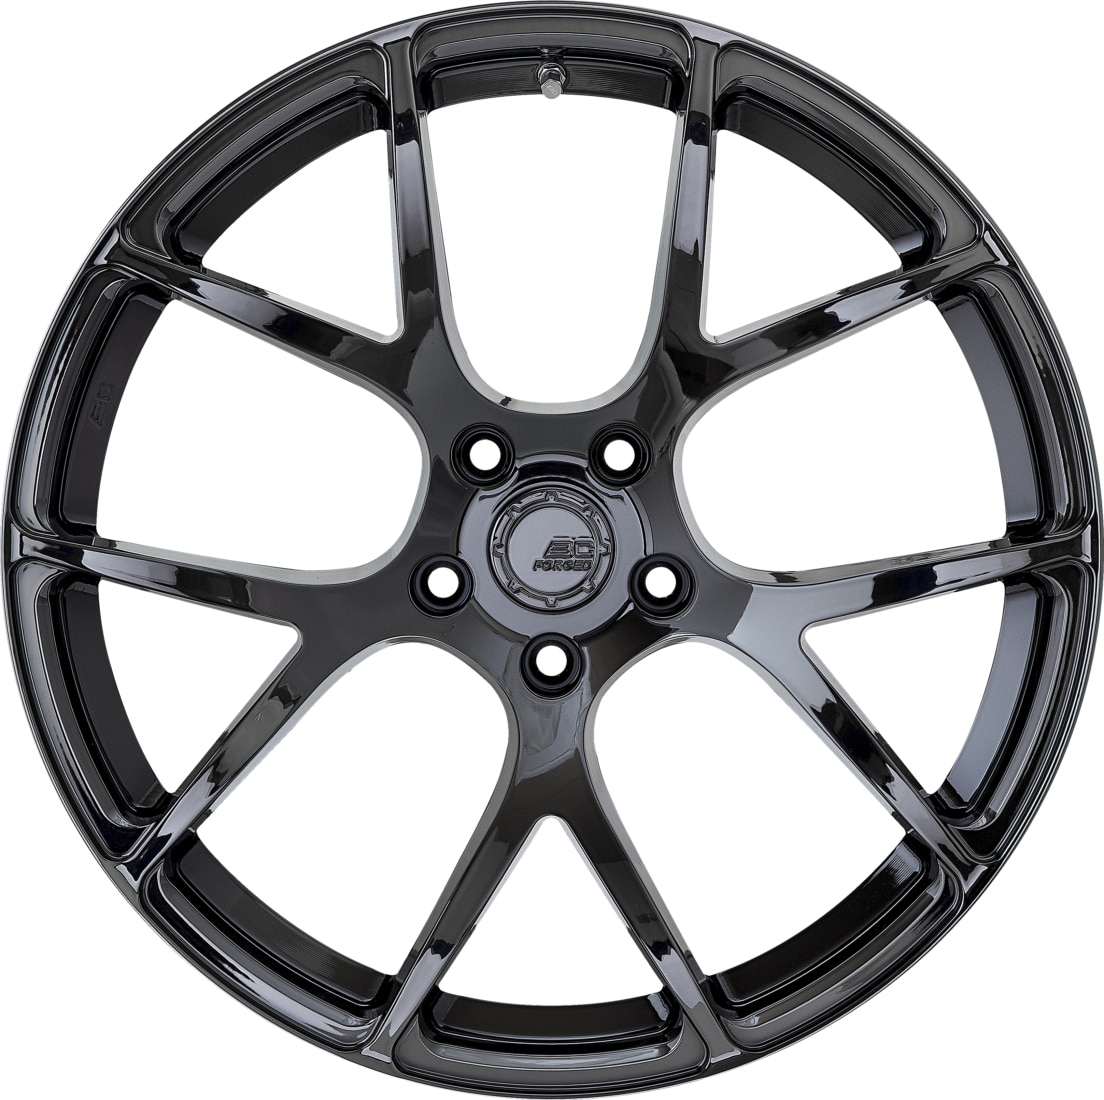 2020-23 BC Forged RS41 Wheels for C8 Corvette, Set of 4